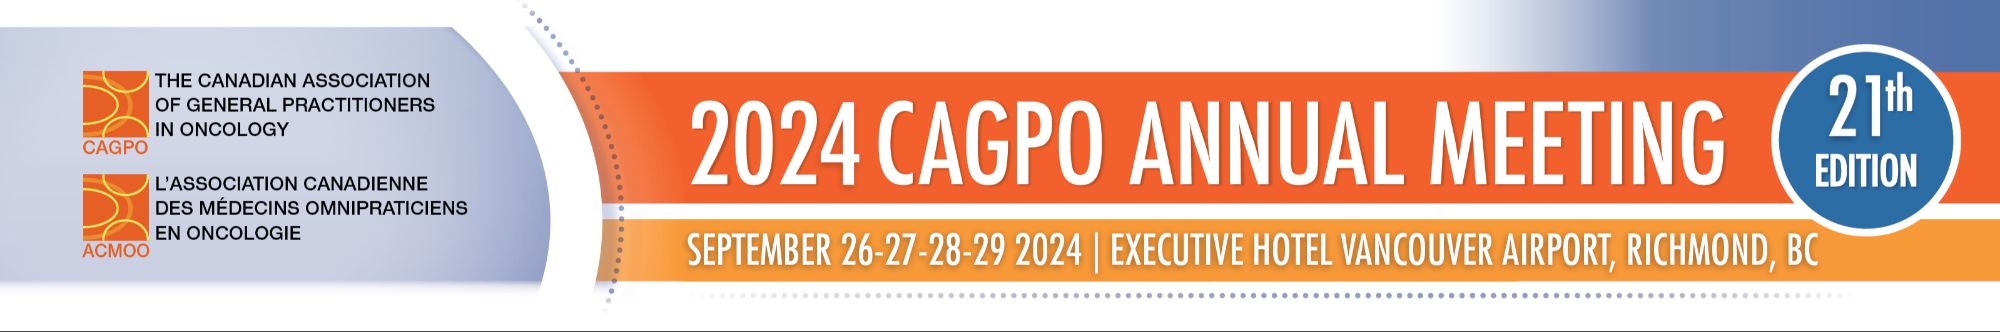 CAGPO 21st Annual Meeting